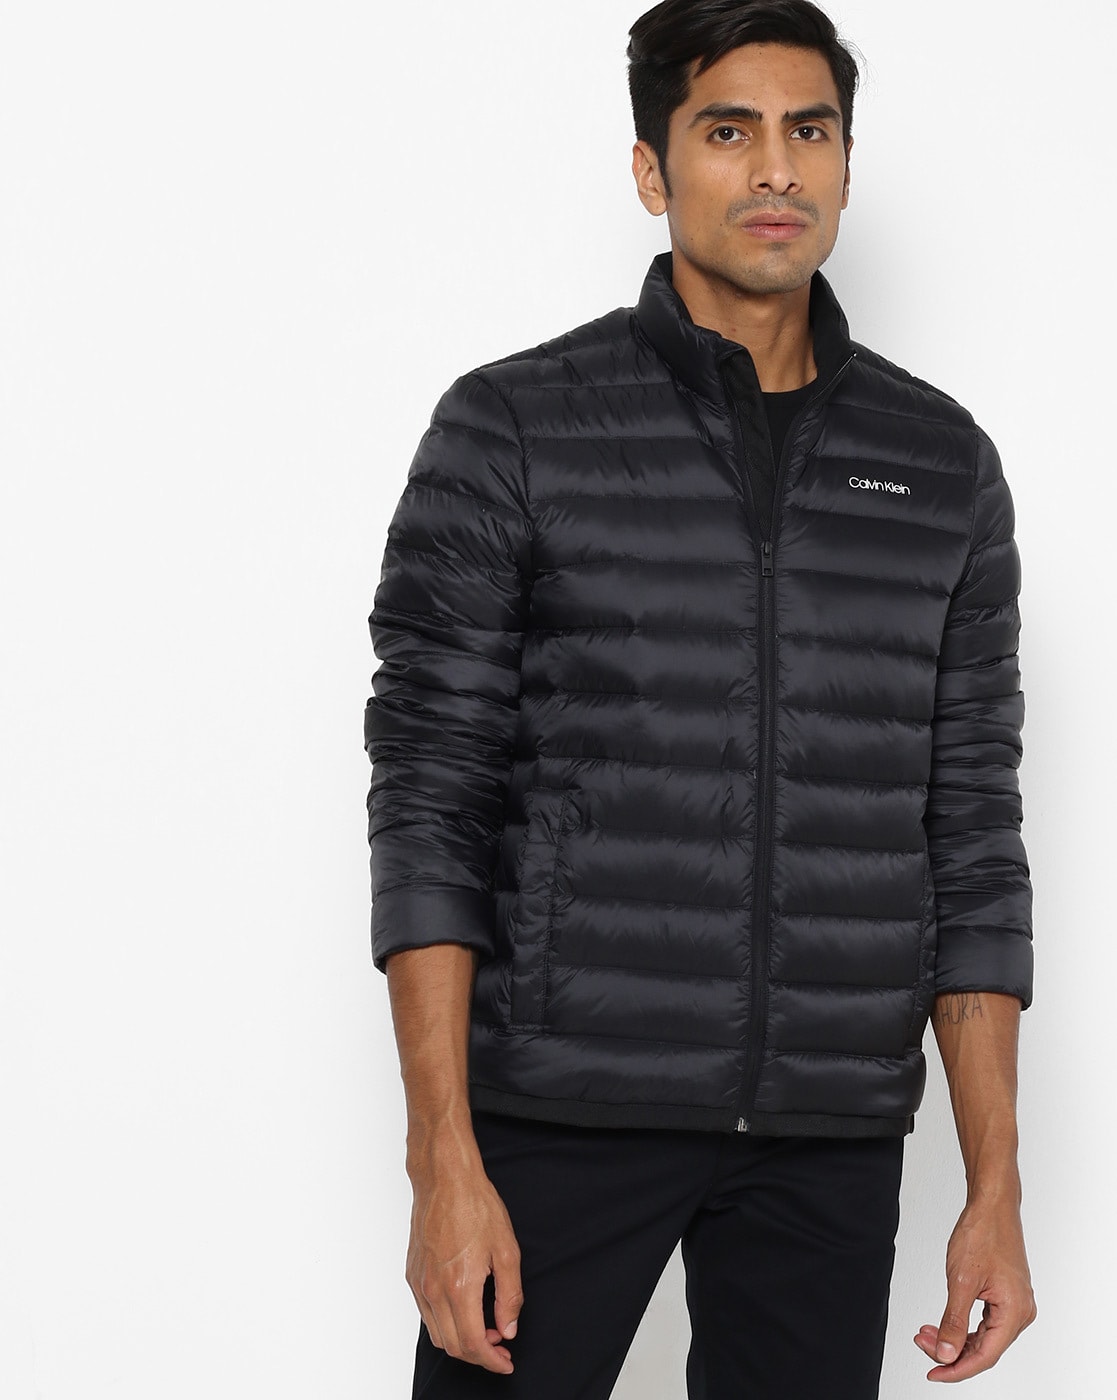 Stay Stylish and Protected with Calvin Klein Men's 3 in 1 Jacket-mncb.edu.vn